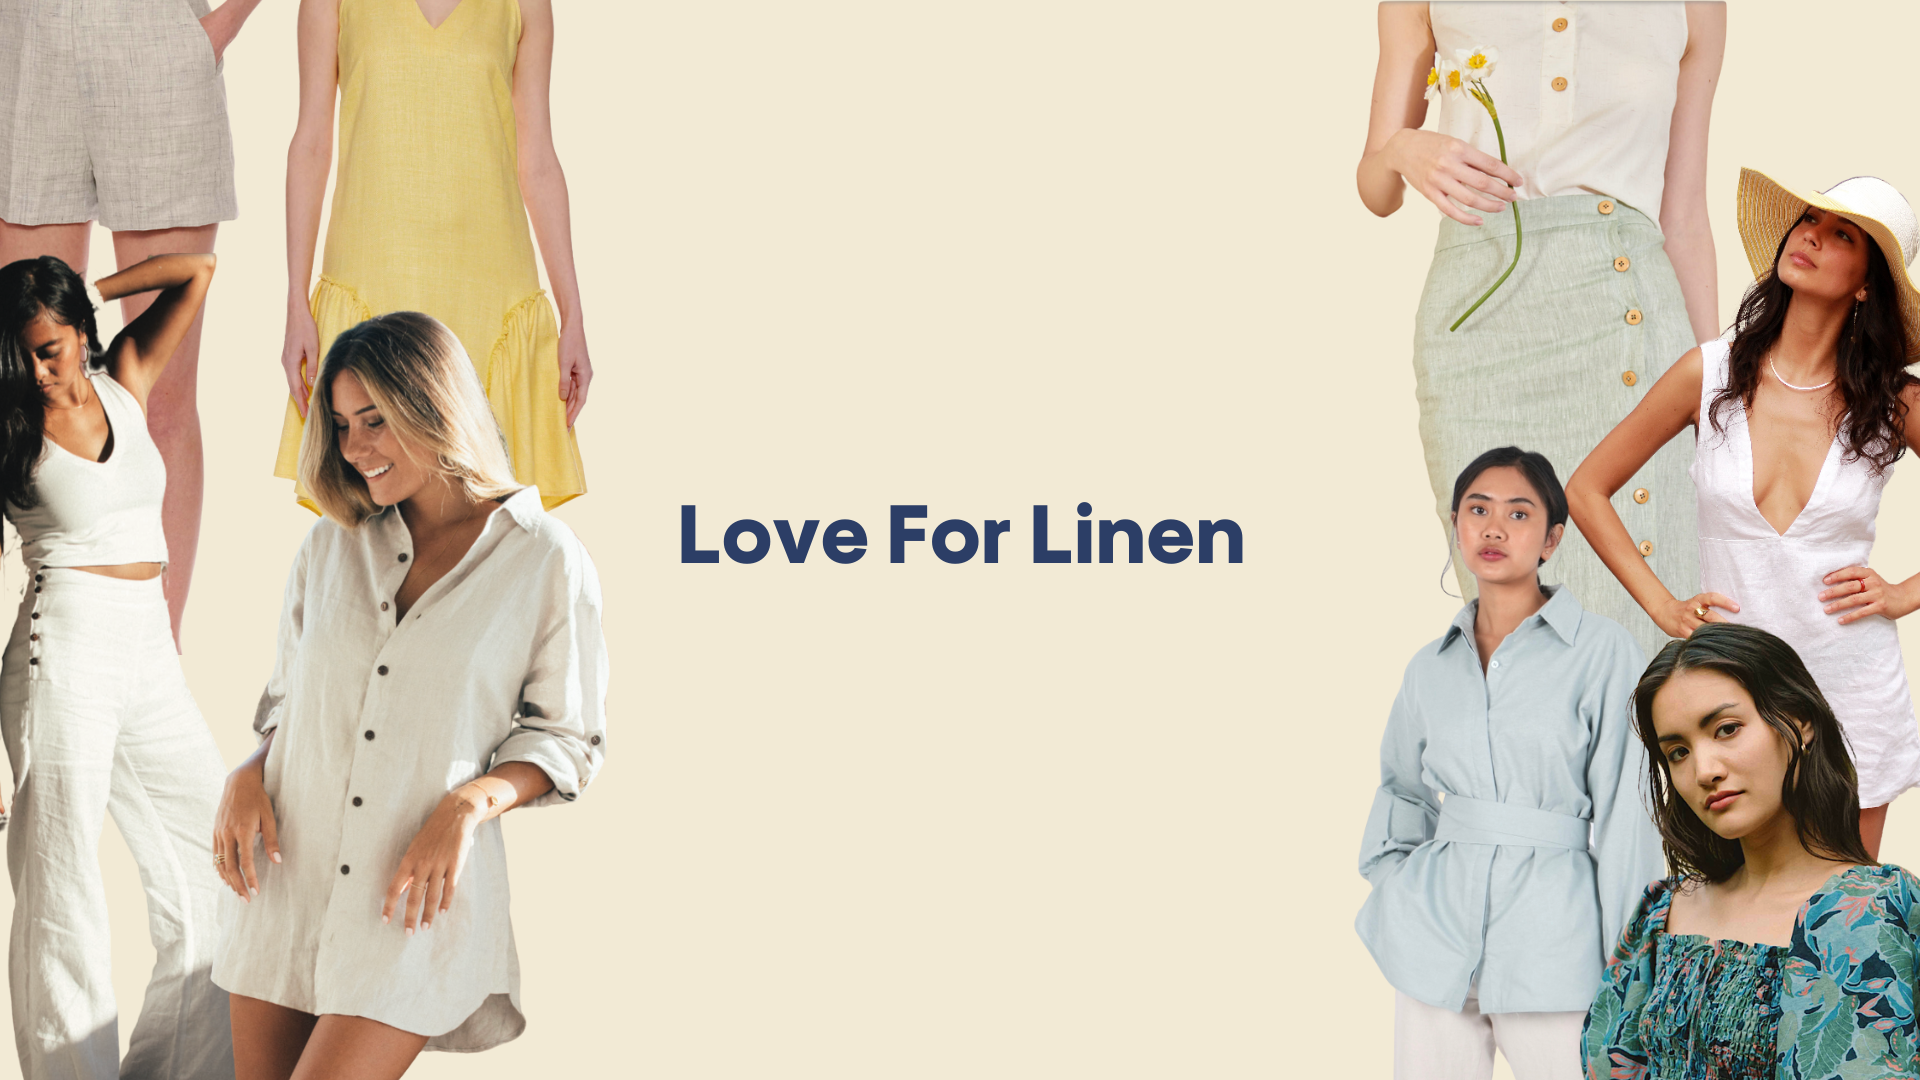 Stay Cool and Conscious: Linen